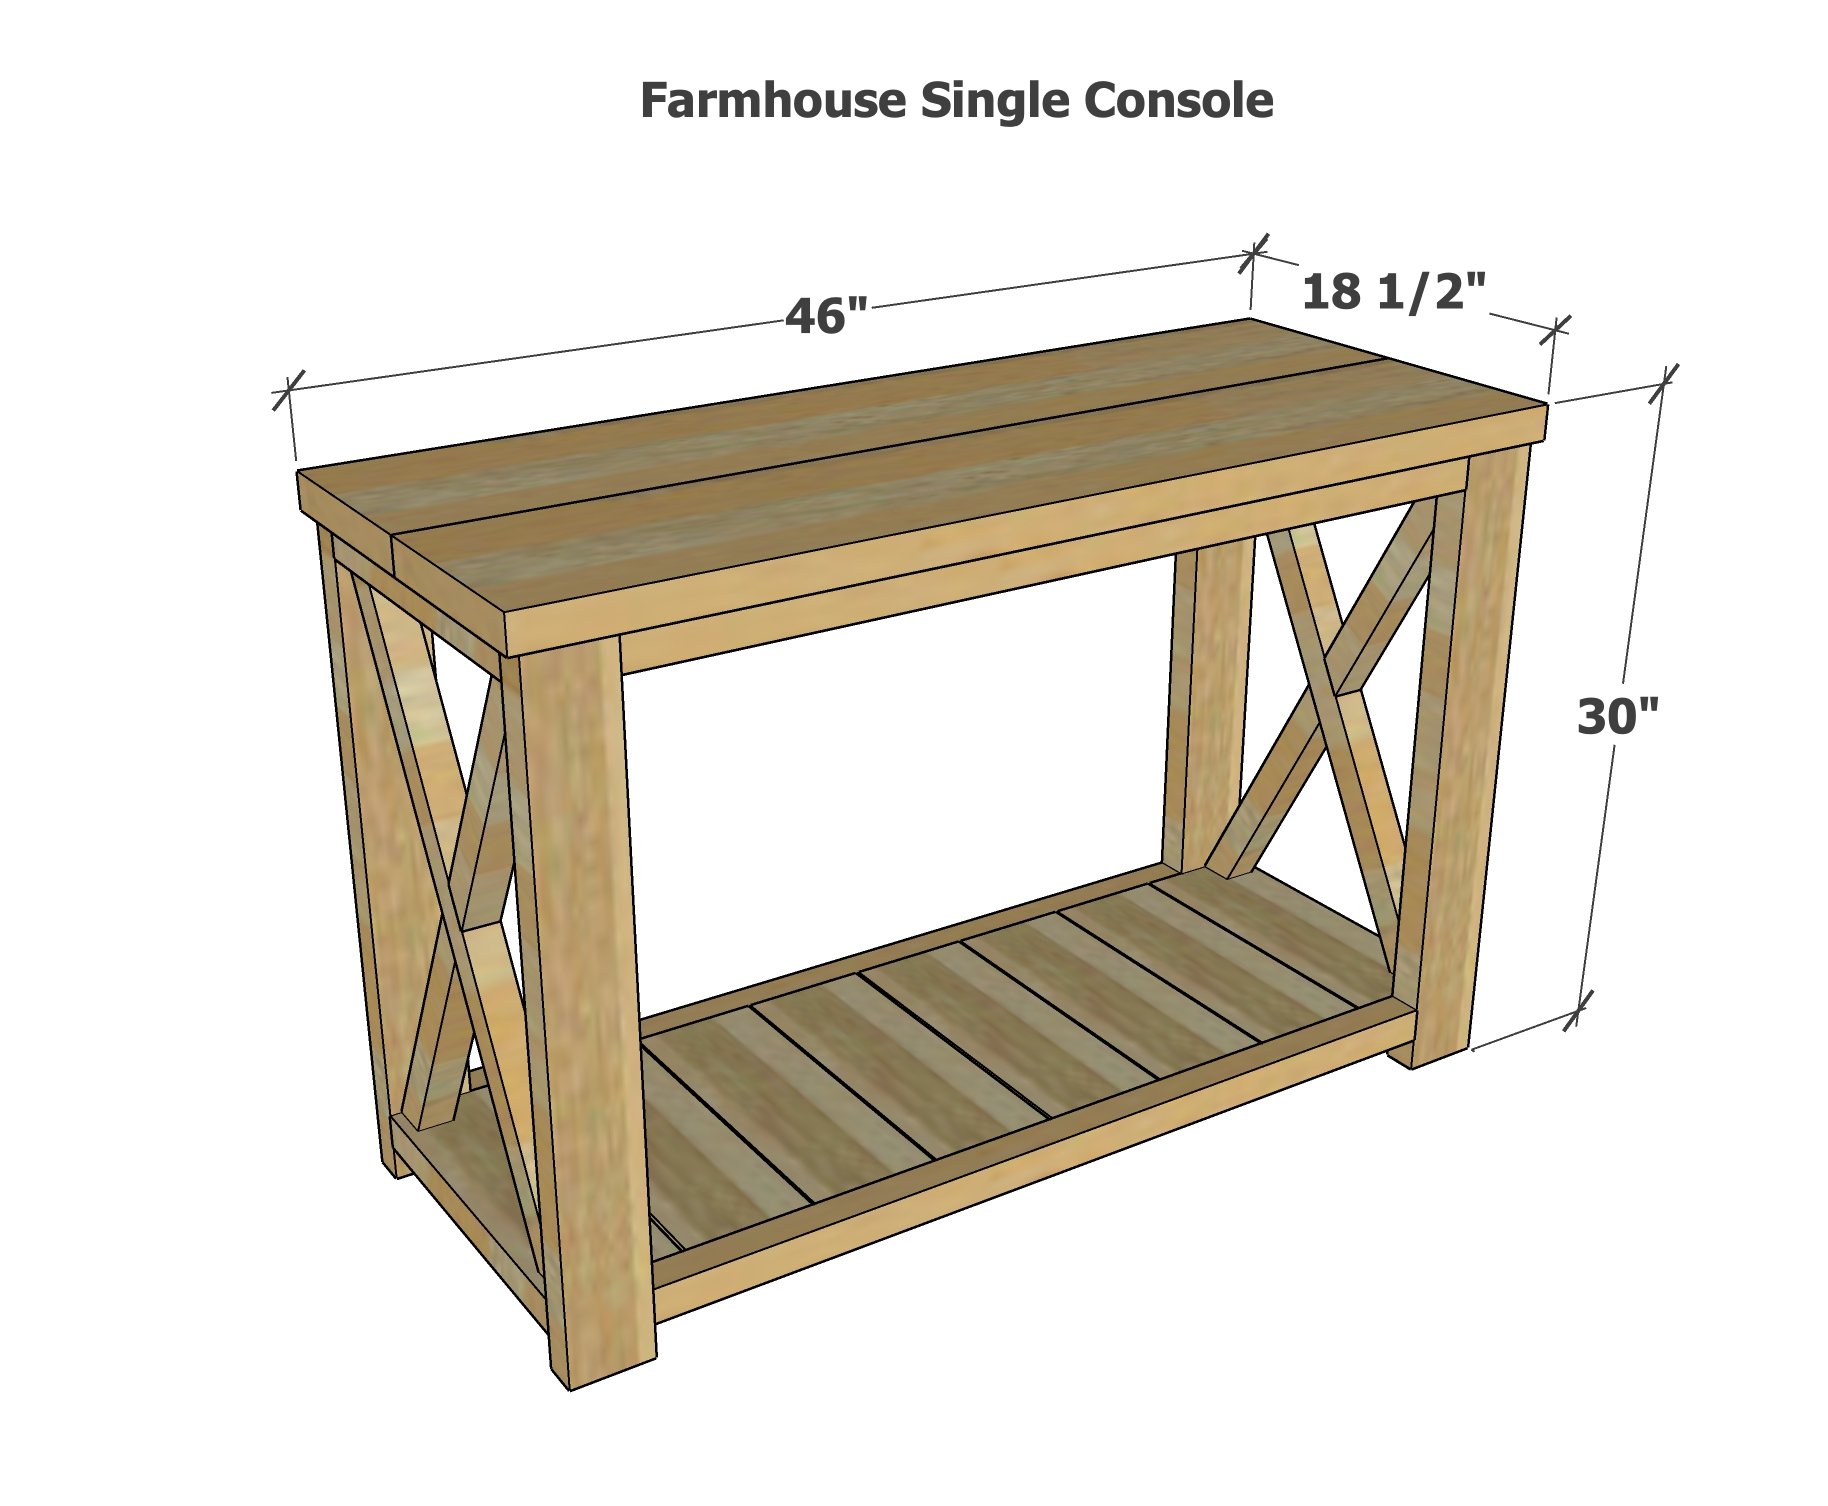 dimensions for farmhouse console table woodworking plan